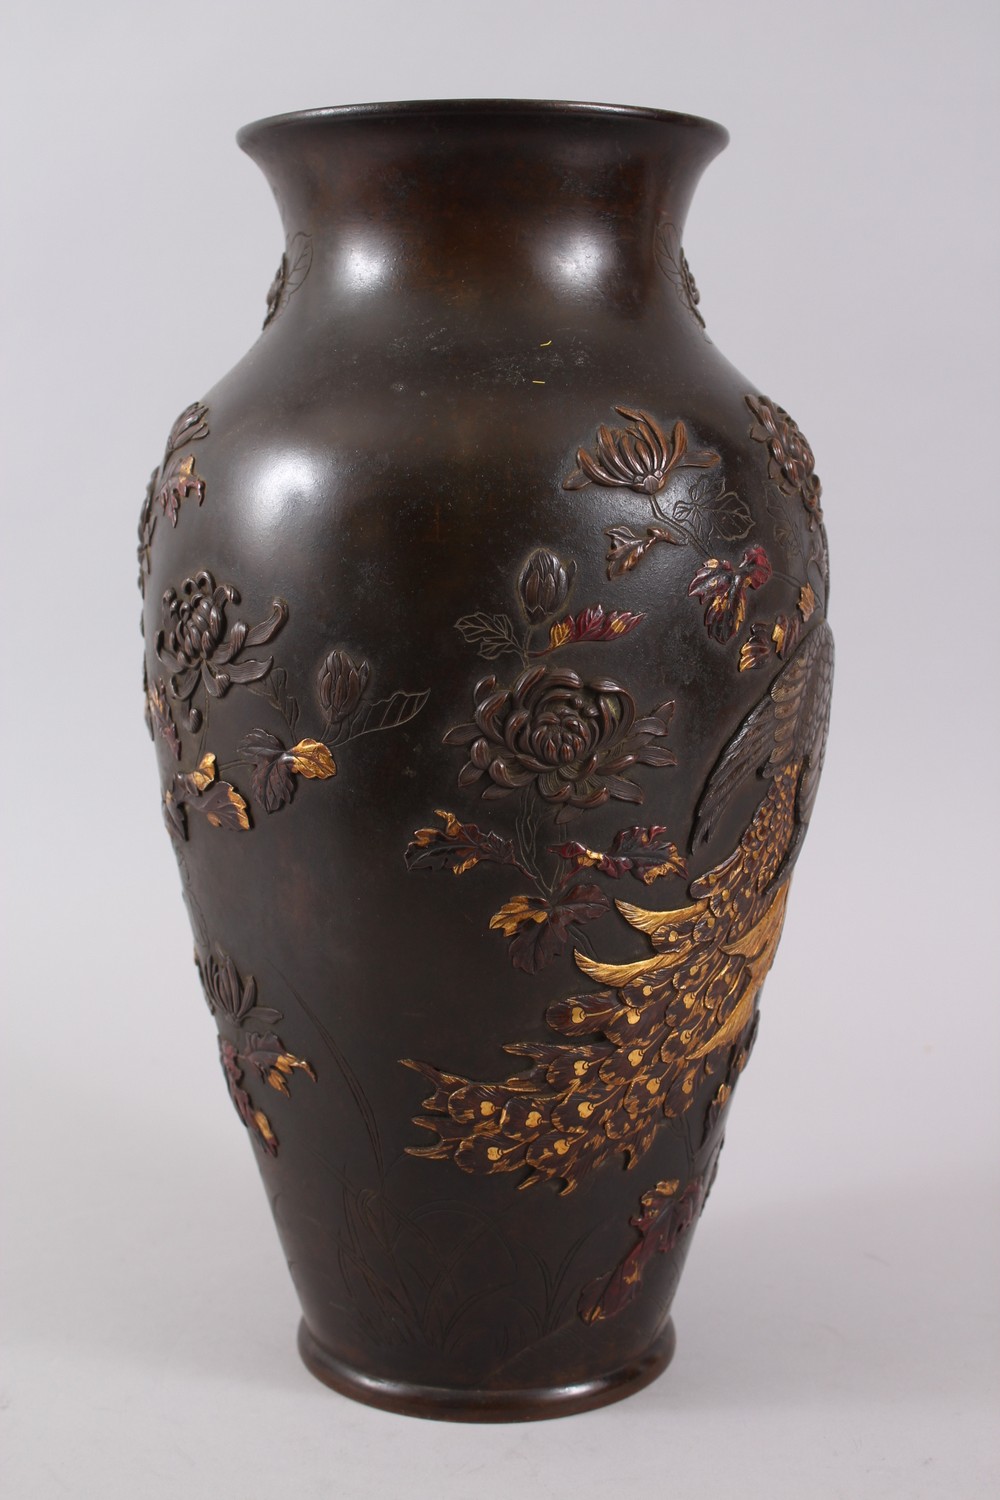 A GOOD JAPANESE MEIJI PERIOD BRONZE & MIXED METAL ONLAID VASE, depicting scenes of a peacock stood - Image 2 of 8